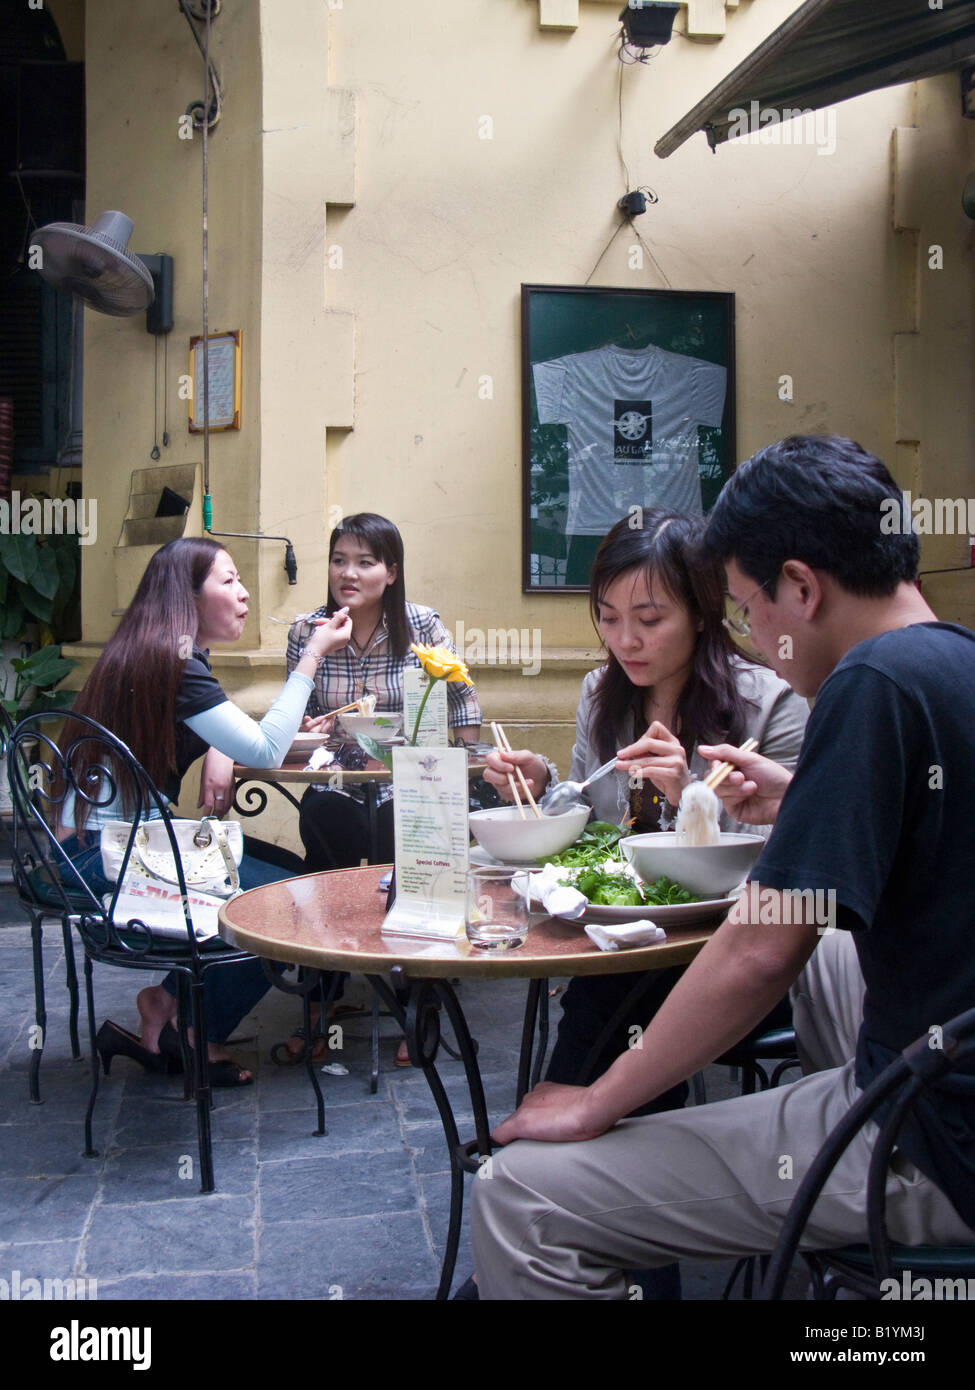 people eating lunch at Diva cafe, Hanoi, Vietnam Stock Photo - Alamy